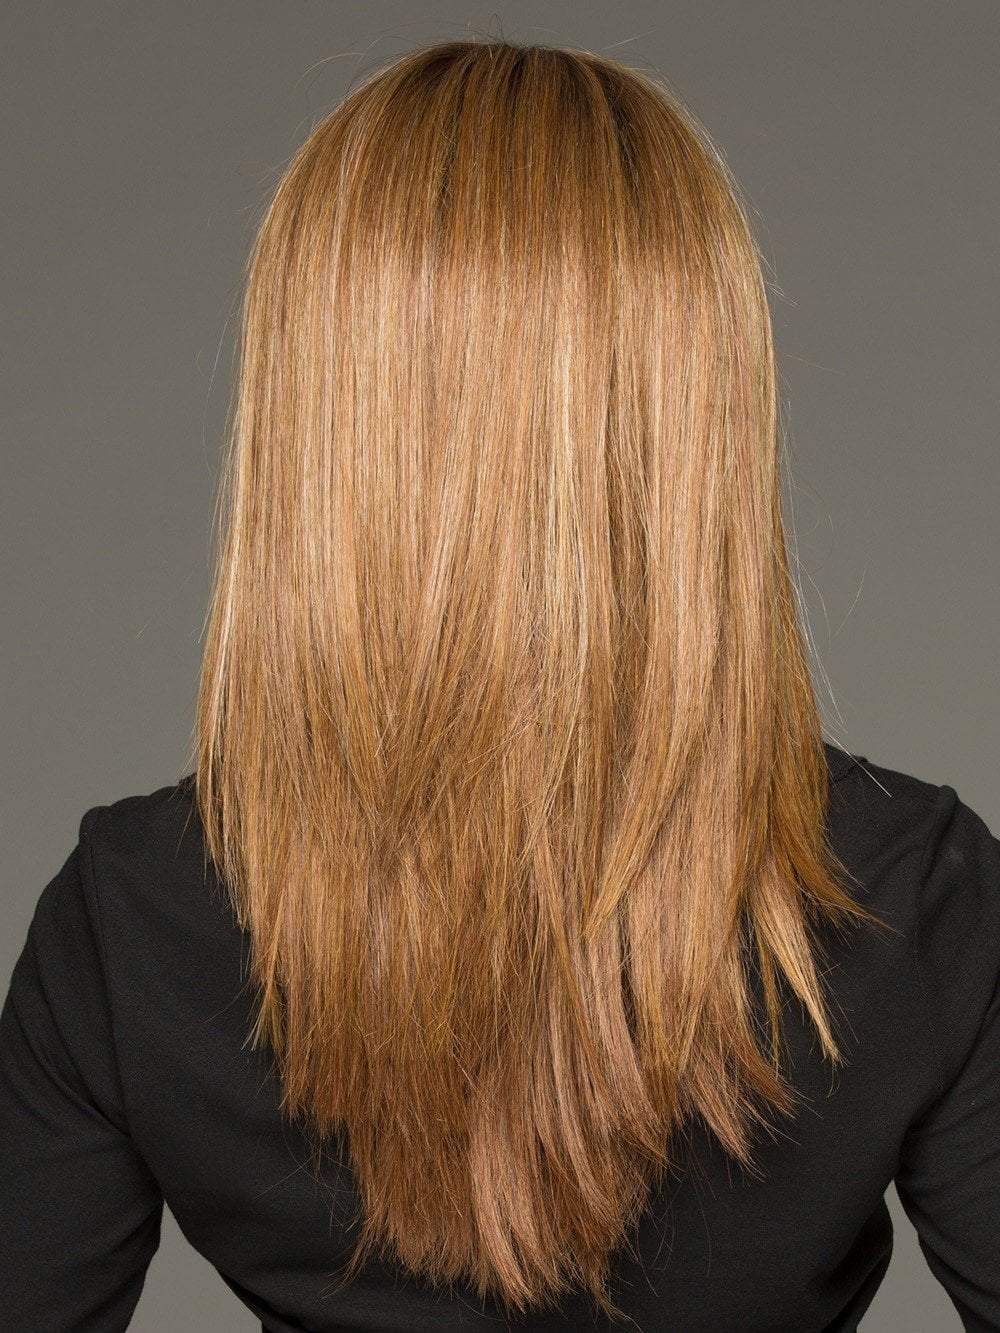 GOLDEN NUTMEG | Medium Brown roots with overall Warm Cinnamon base and Golden Blonde highlights (This piece has been styled and straightened)